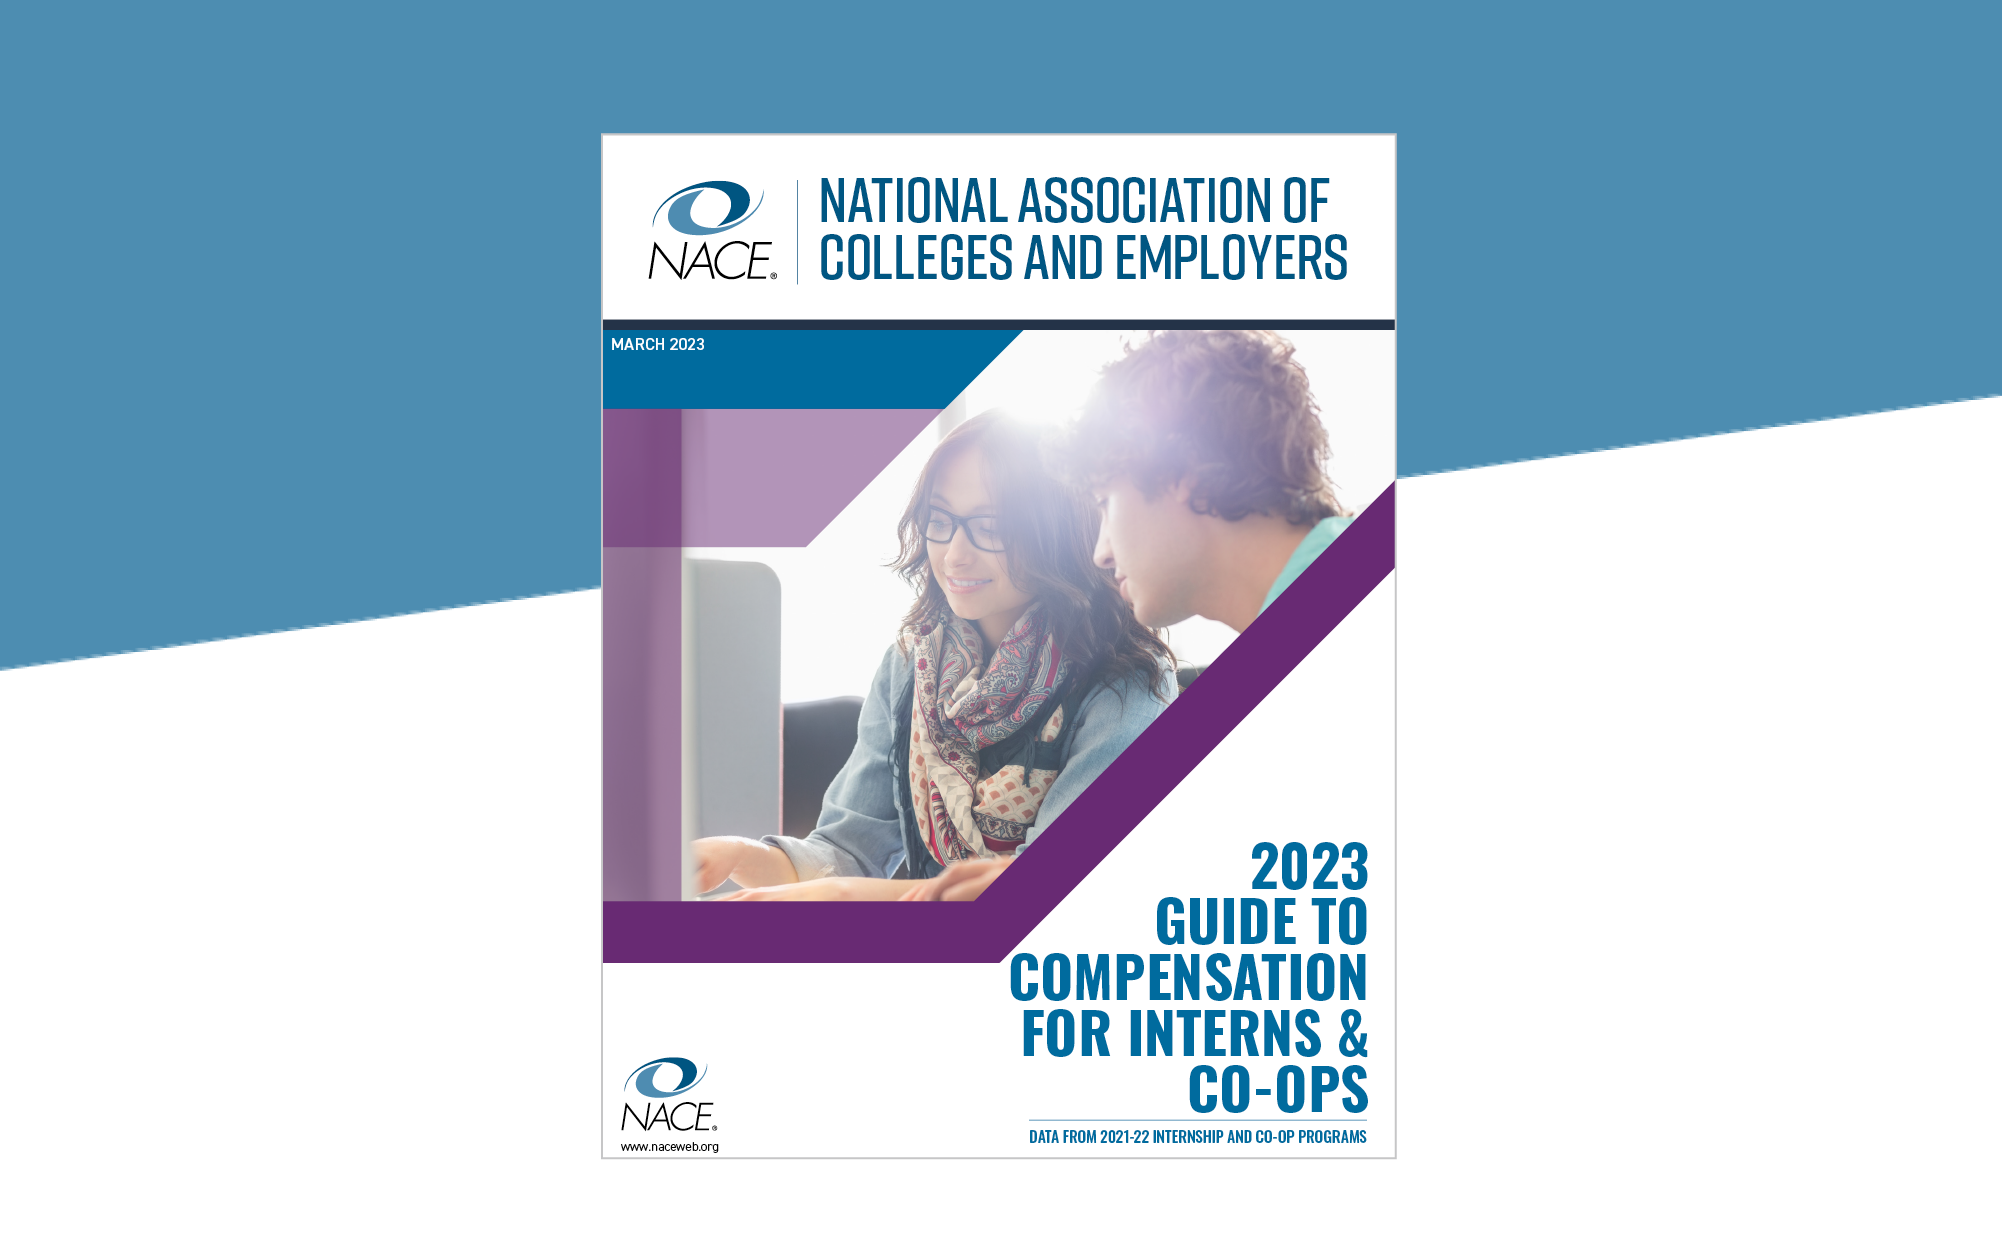 2023 Guide to Compensation for Interns & Co-Ops Report